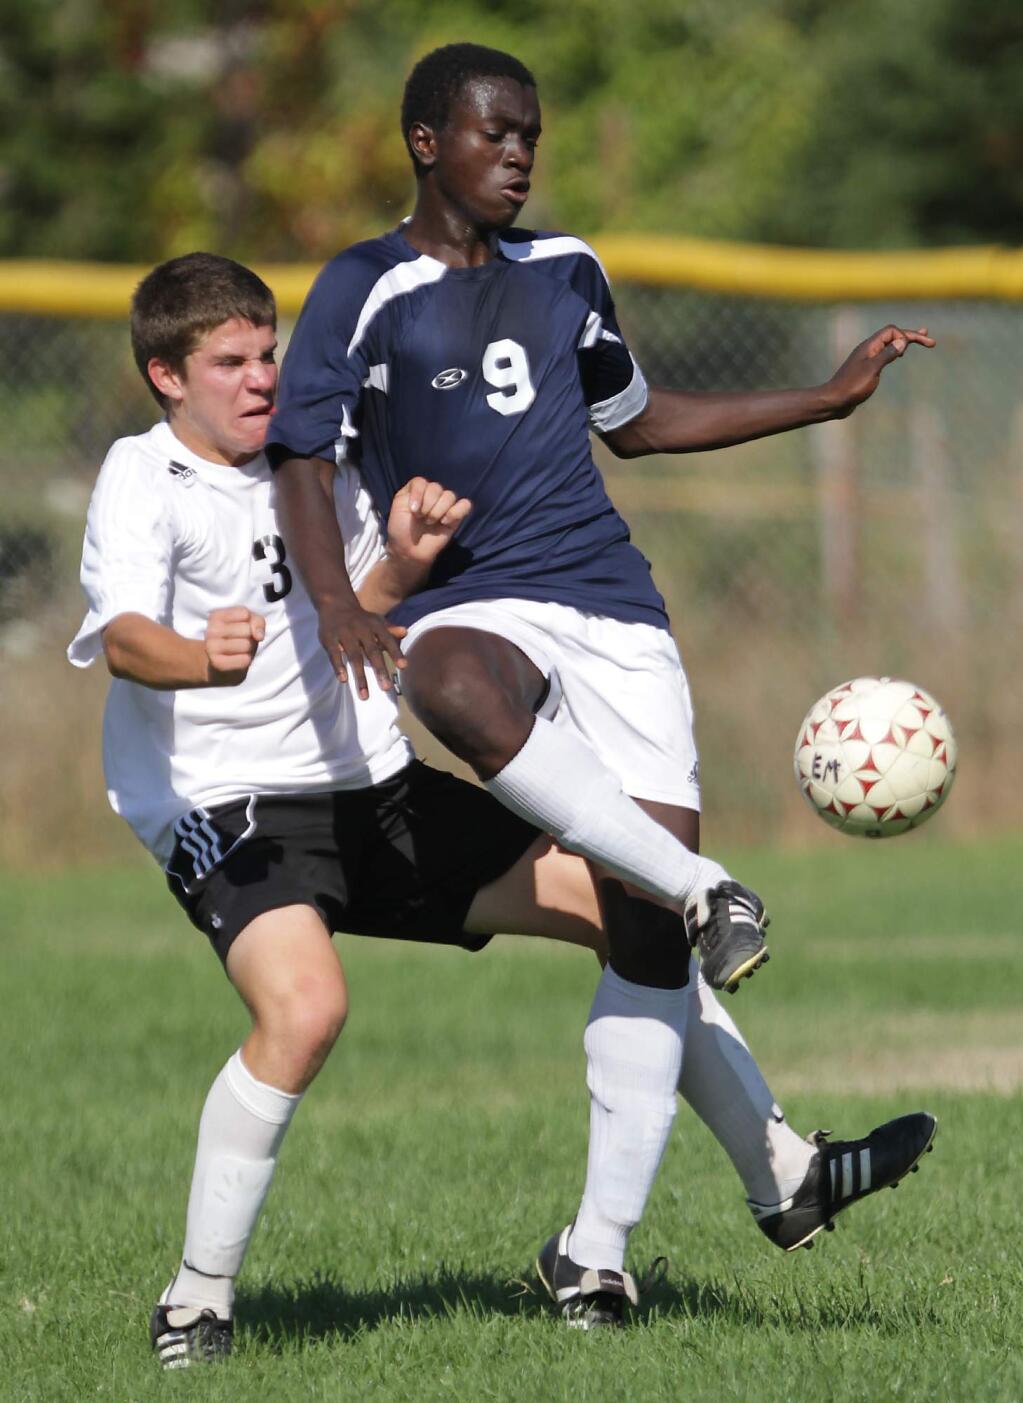 Rancho Cotate's Roy Boateng passes the ball as El Molino's Mitch Parsons pressures him during a 2011 game held at El Molino High School. (Press Democrat file)